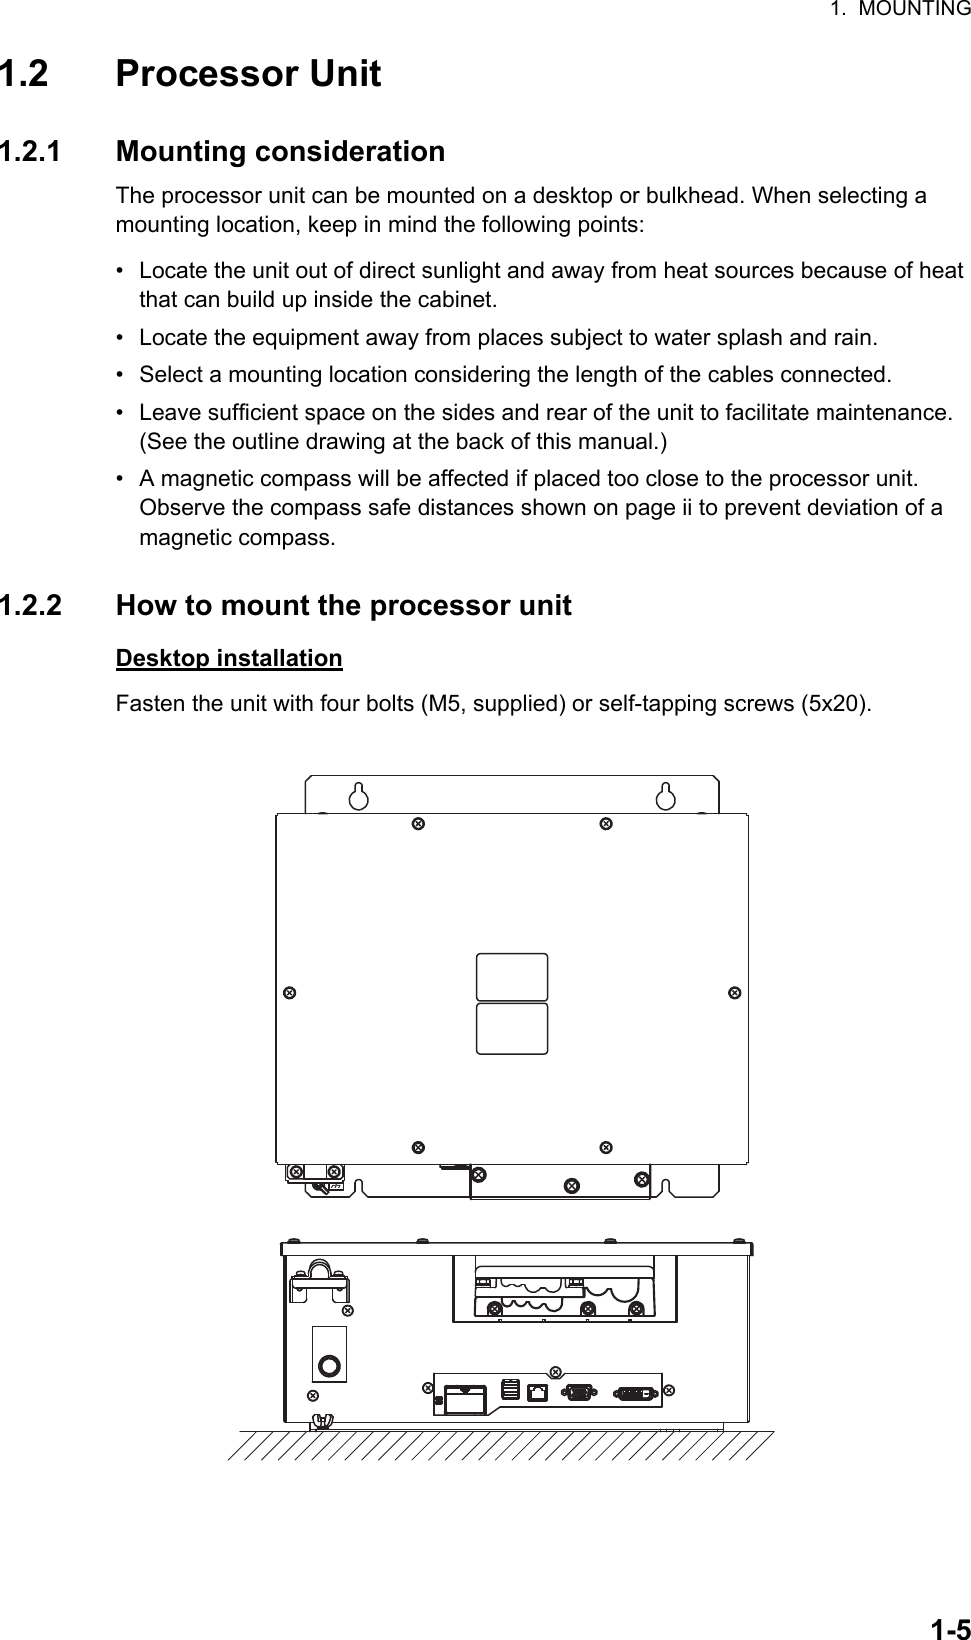 1.  MOUNTING1-51.2 Processor Unit1.2.1 Mounting considerationThe processor unit can be mounted on a desktop or bulkhead. When selecting a mounting location, keep in mind the following points:•  Locate the unit out of direct sunlight and away from heat sources because of heat that can build up inside the cabinet.•  Locate the equipment away from places subject to water splash and rain.•  Select a mounting location considering the length of the cables connected.•  Leave sufficient space on the sides and rear of the unit to facilitate maintenance. (See the outline drawing at the back of this manual.)•  A magnetic compass will be affected if placed too close to the processor unit.        Observe the compass safe distances shown on page ii to prevent deviation of a magnetic compass.1.2.2 How to mount the processor unitDesktop installationFasten the unit with four bolts (M5, supplied) or self-tapping screws (5x20).